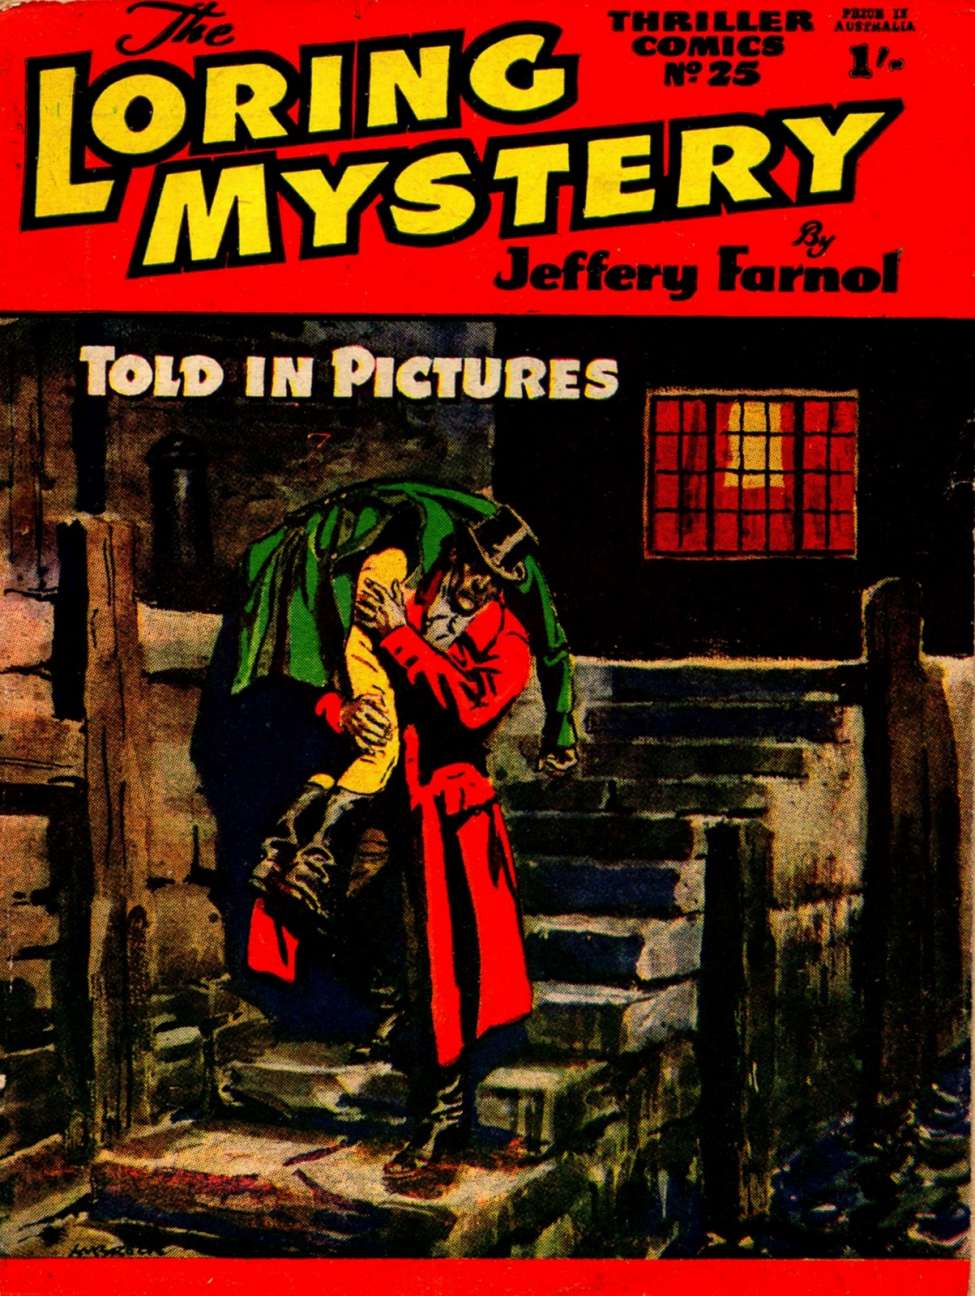 Book Cover For Thriller Comics 25 - The Loring Mystery - Jeffrey Farnol